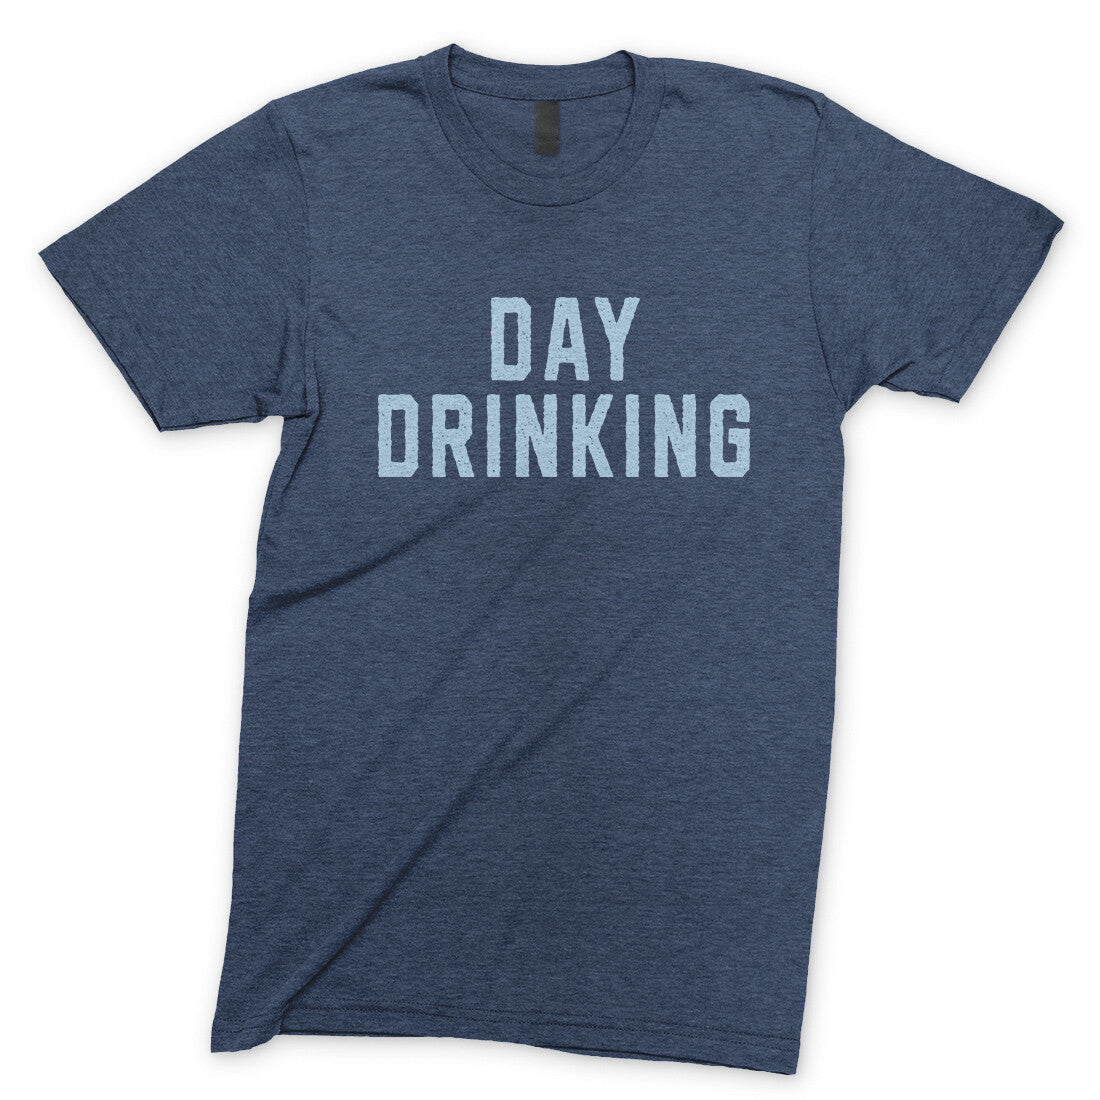 Day Drinking in Navy Heather Color